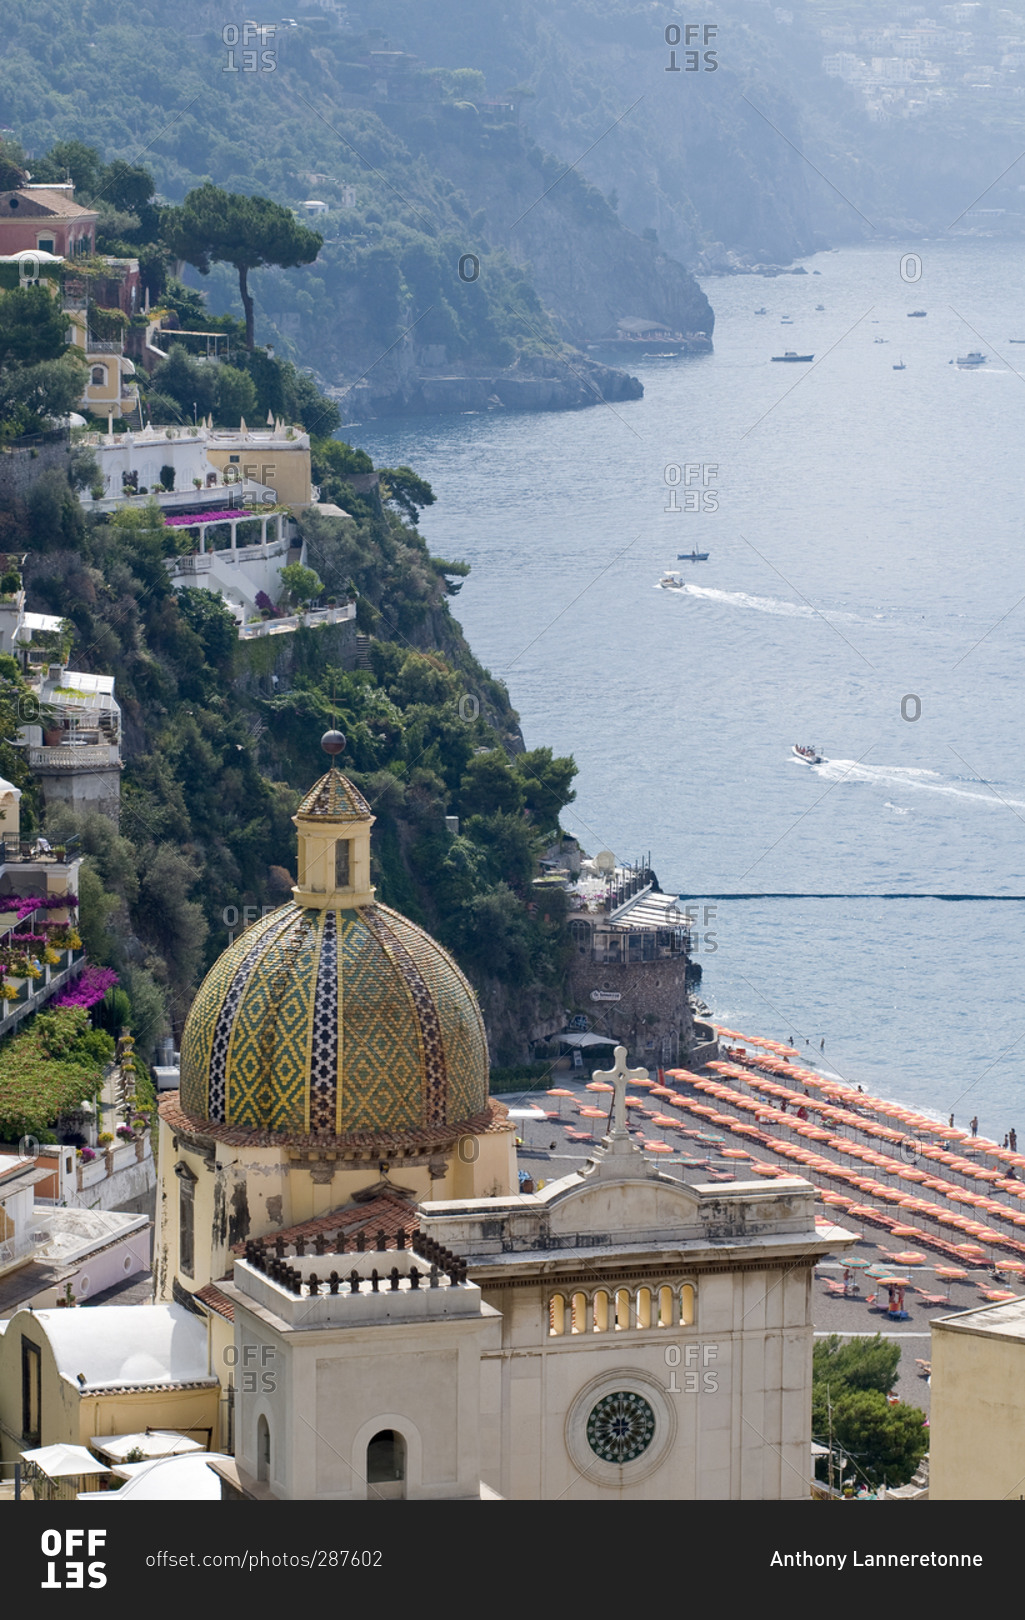 View of architecture and shoreline in Positano on the Amalfi Coast in Italy